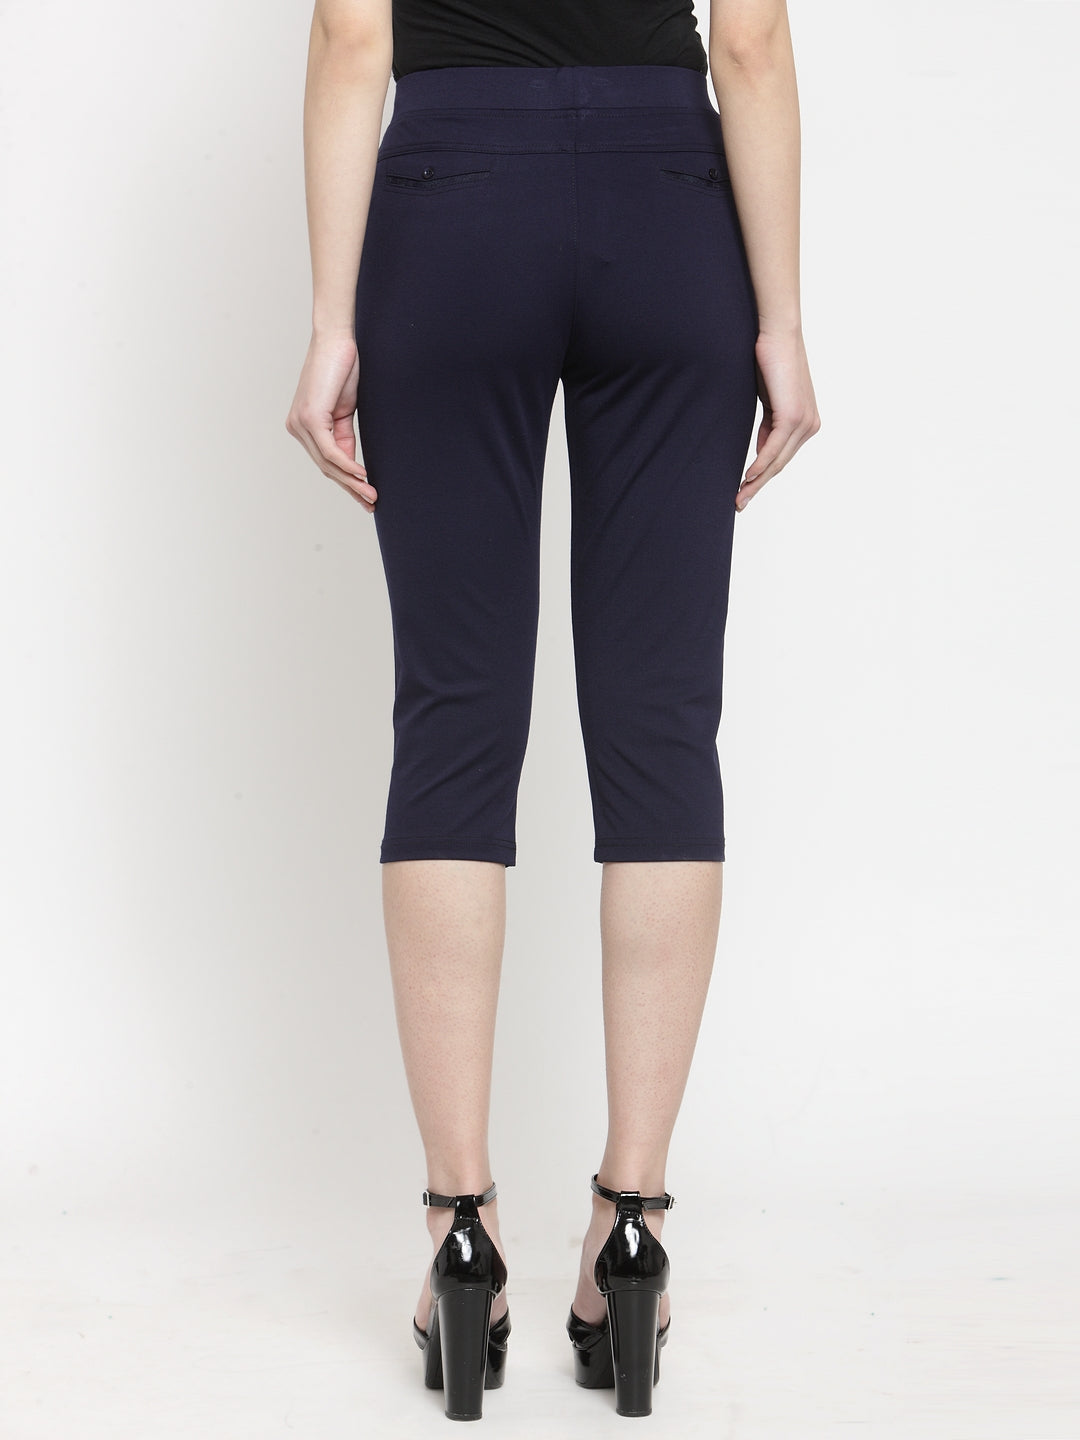 Women Skinny Fitted Navy Blue Solid Capri